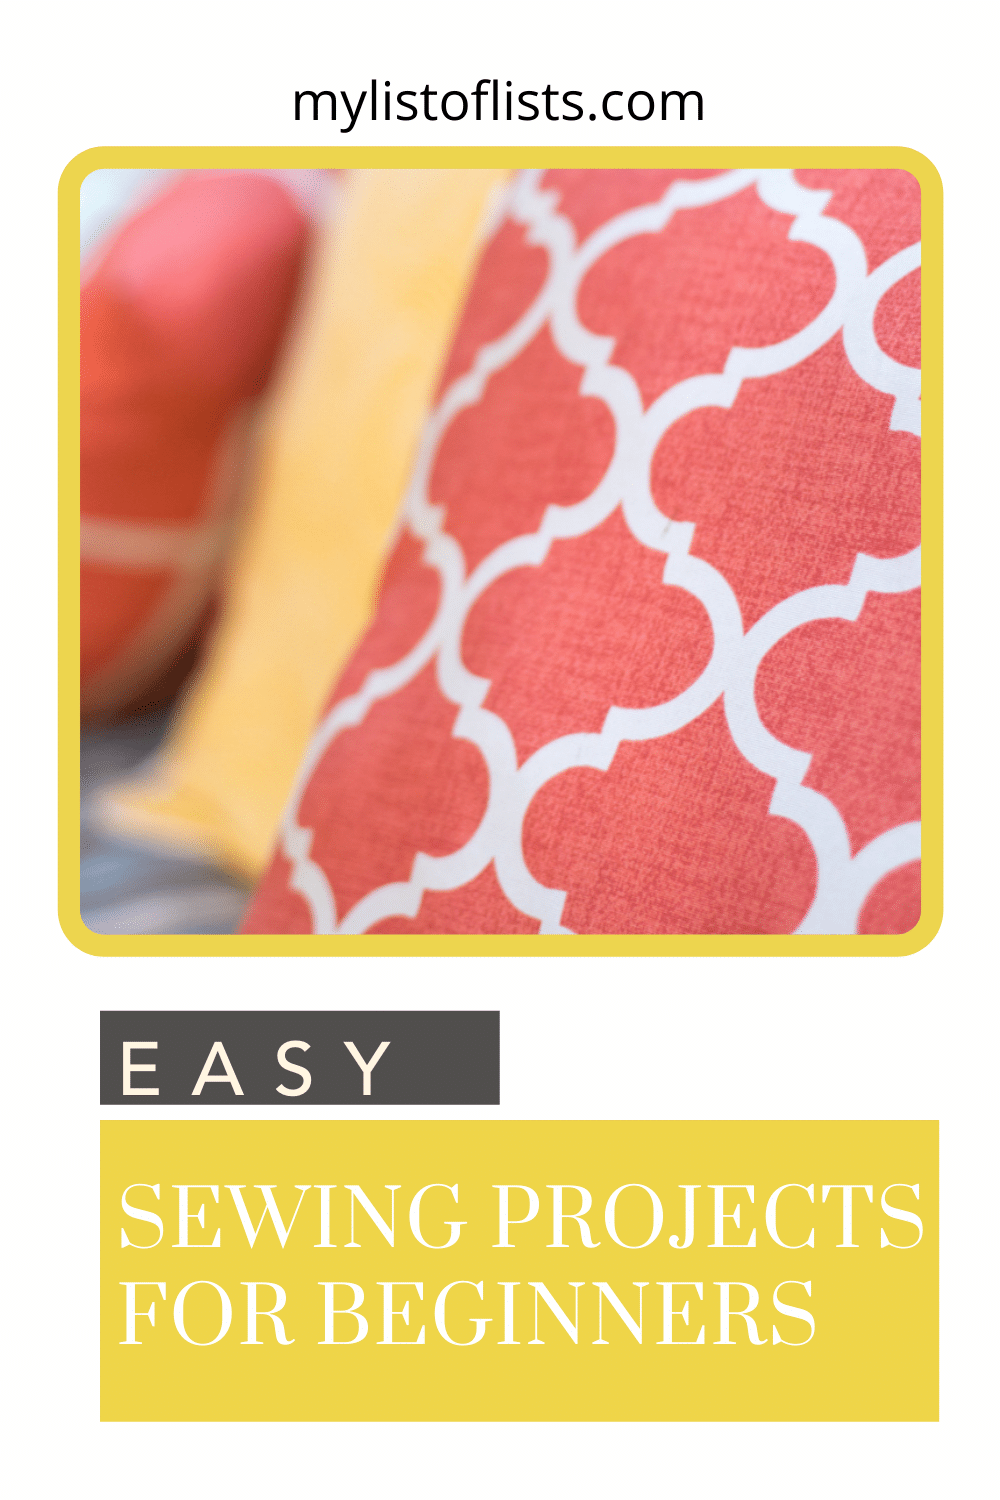 Mylistoflists.com has great tips, tricks, and ideas to make things easier on you. Find the hacks you need to coast through life now. These sewing projects look great and are easy enough for beginners!